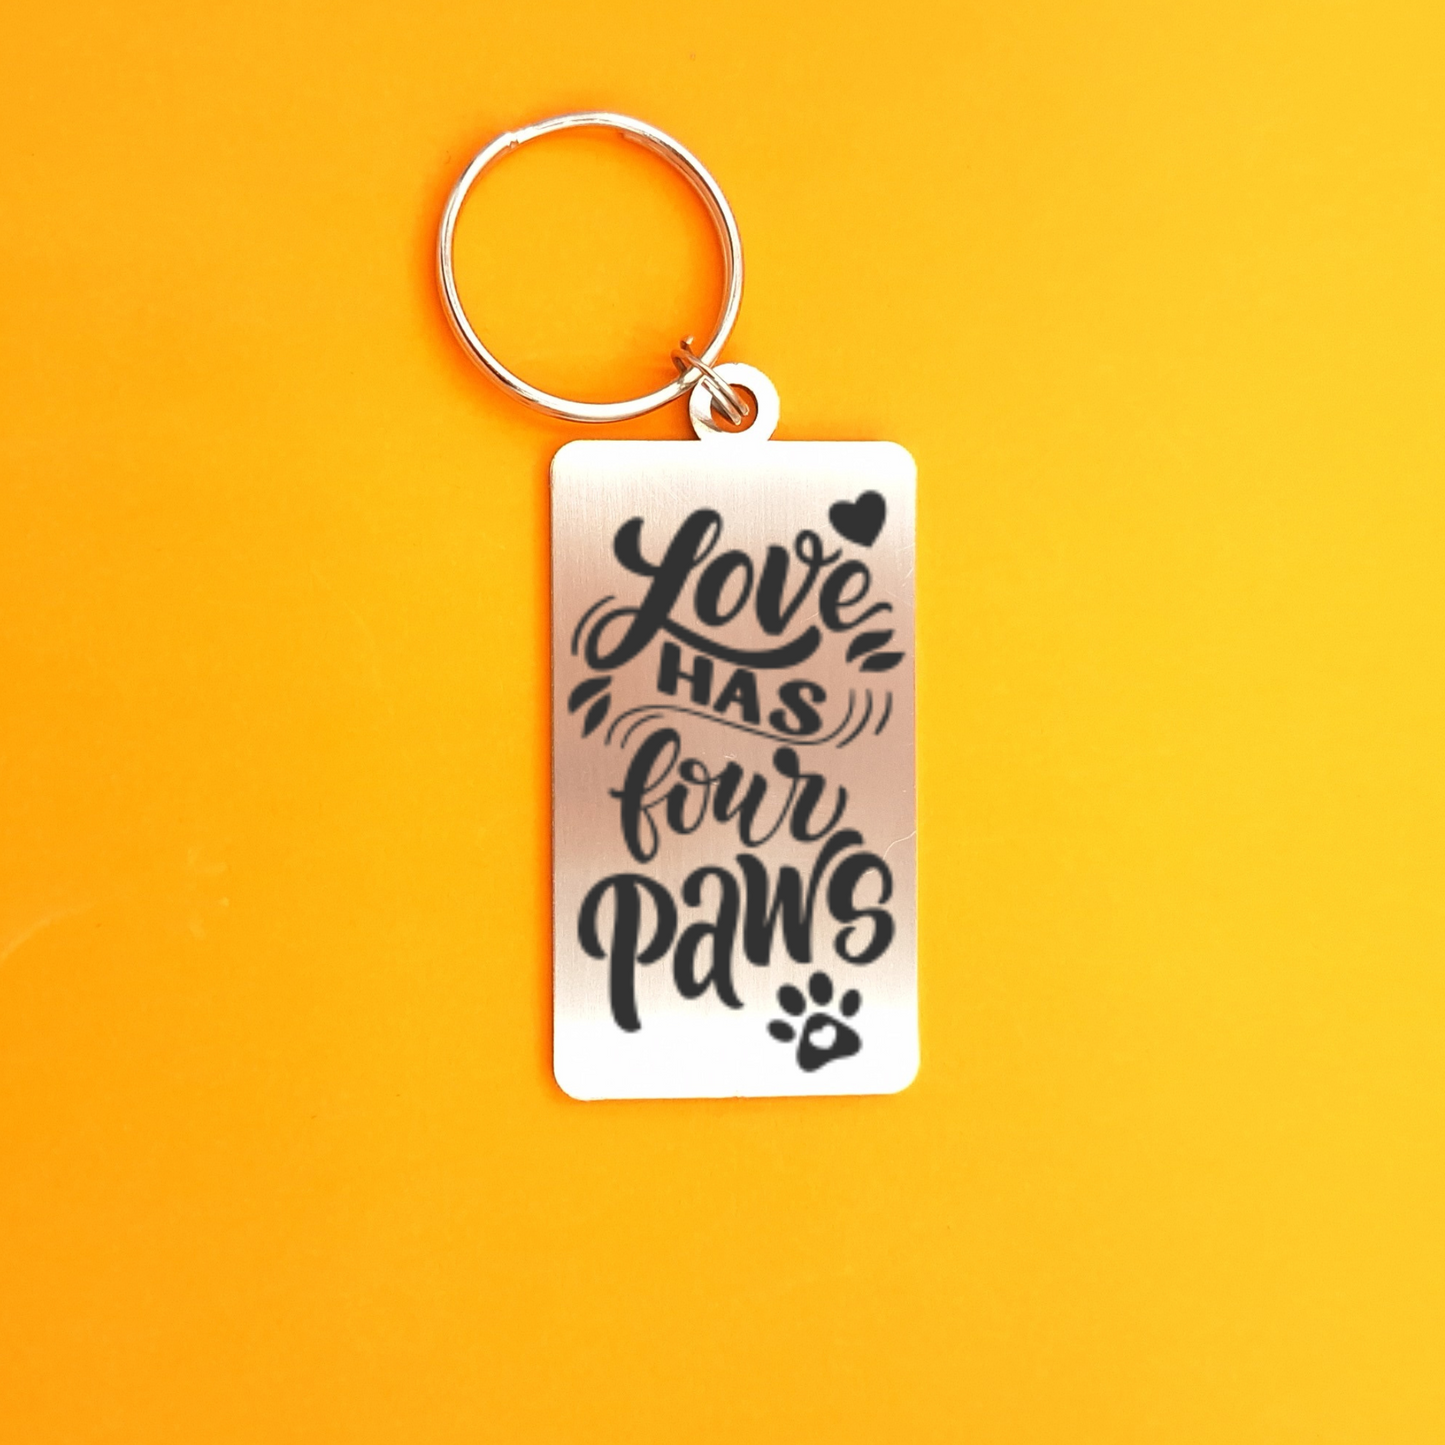 Love has four paws - stainless steel keyring